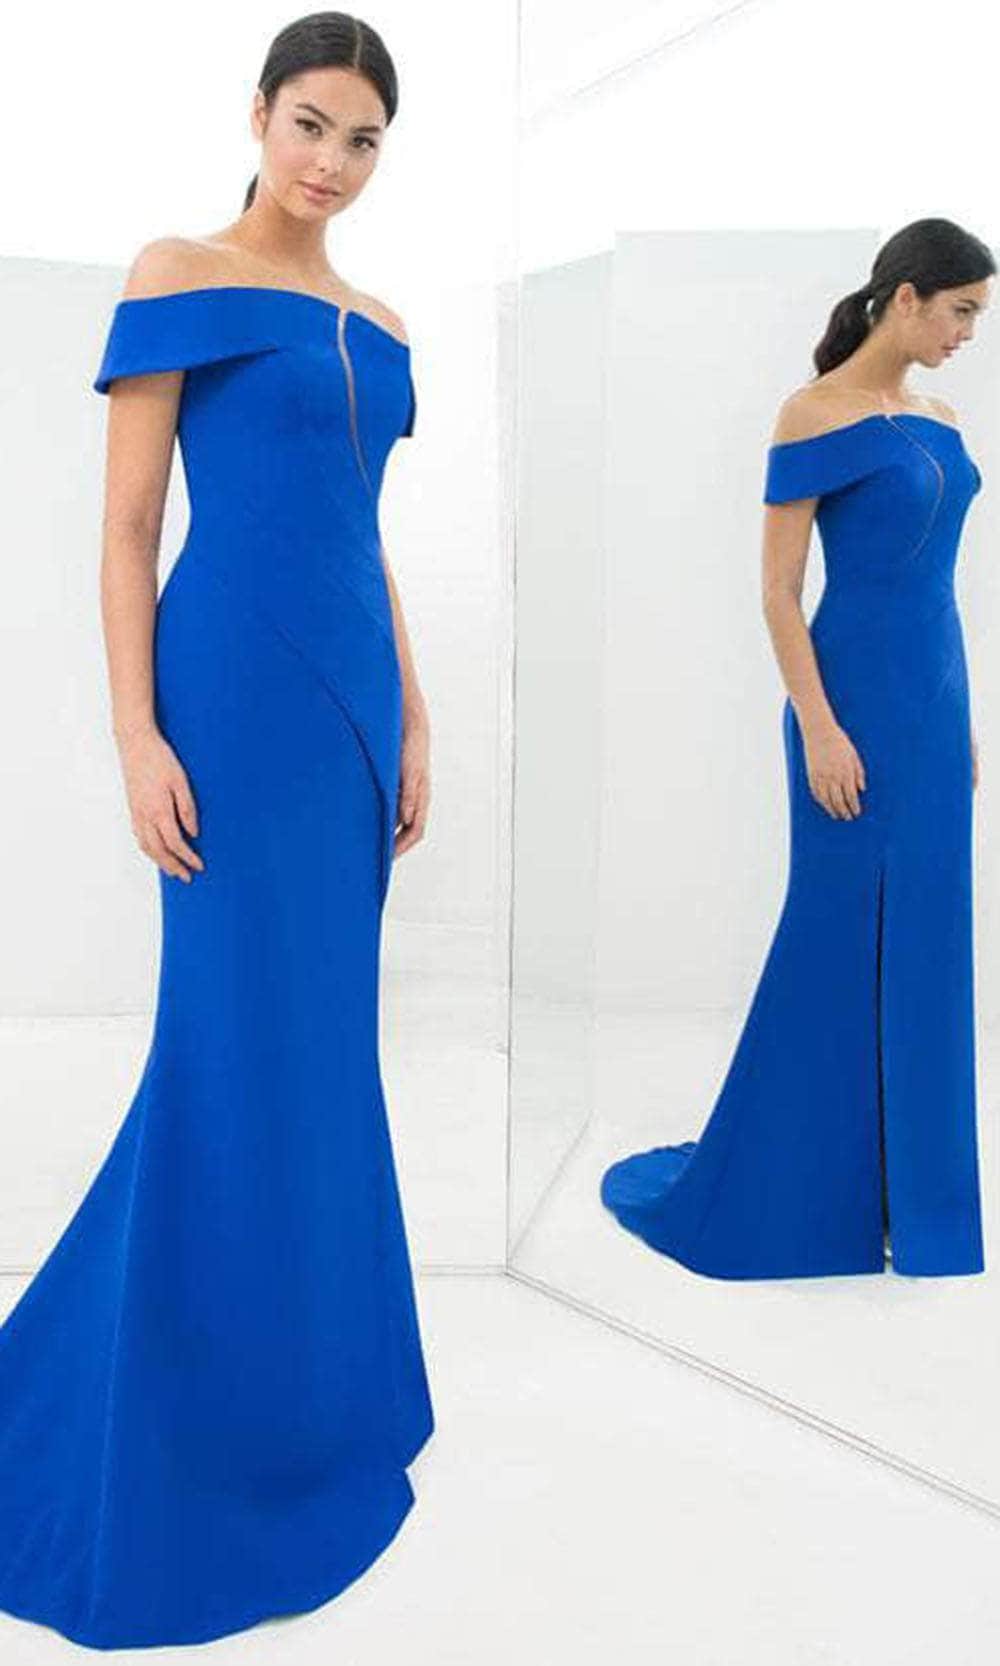 Alexander By Daymor 1373 - Off-Shoulder Cutout Formal Gown Special Occasion Dress 0 / Blue